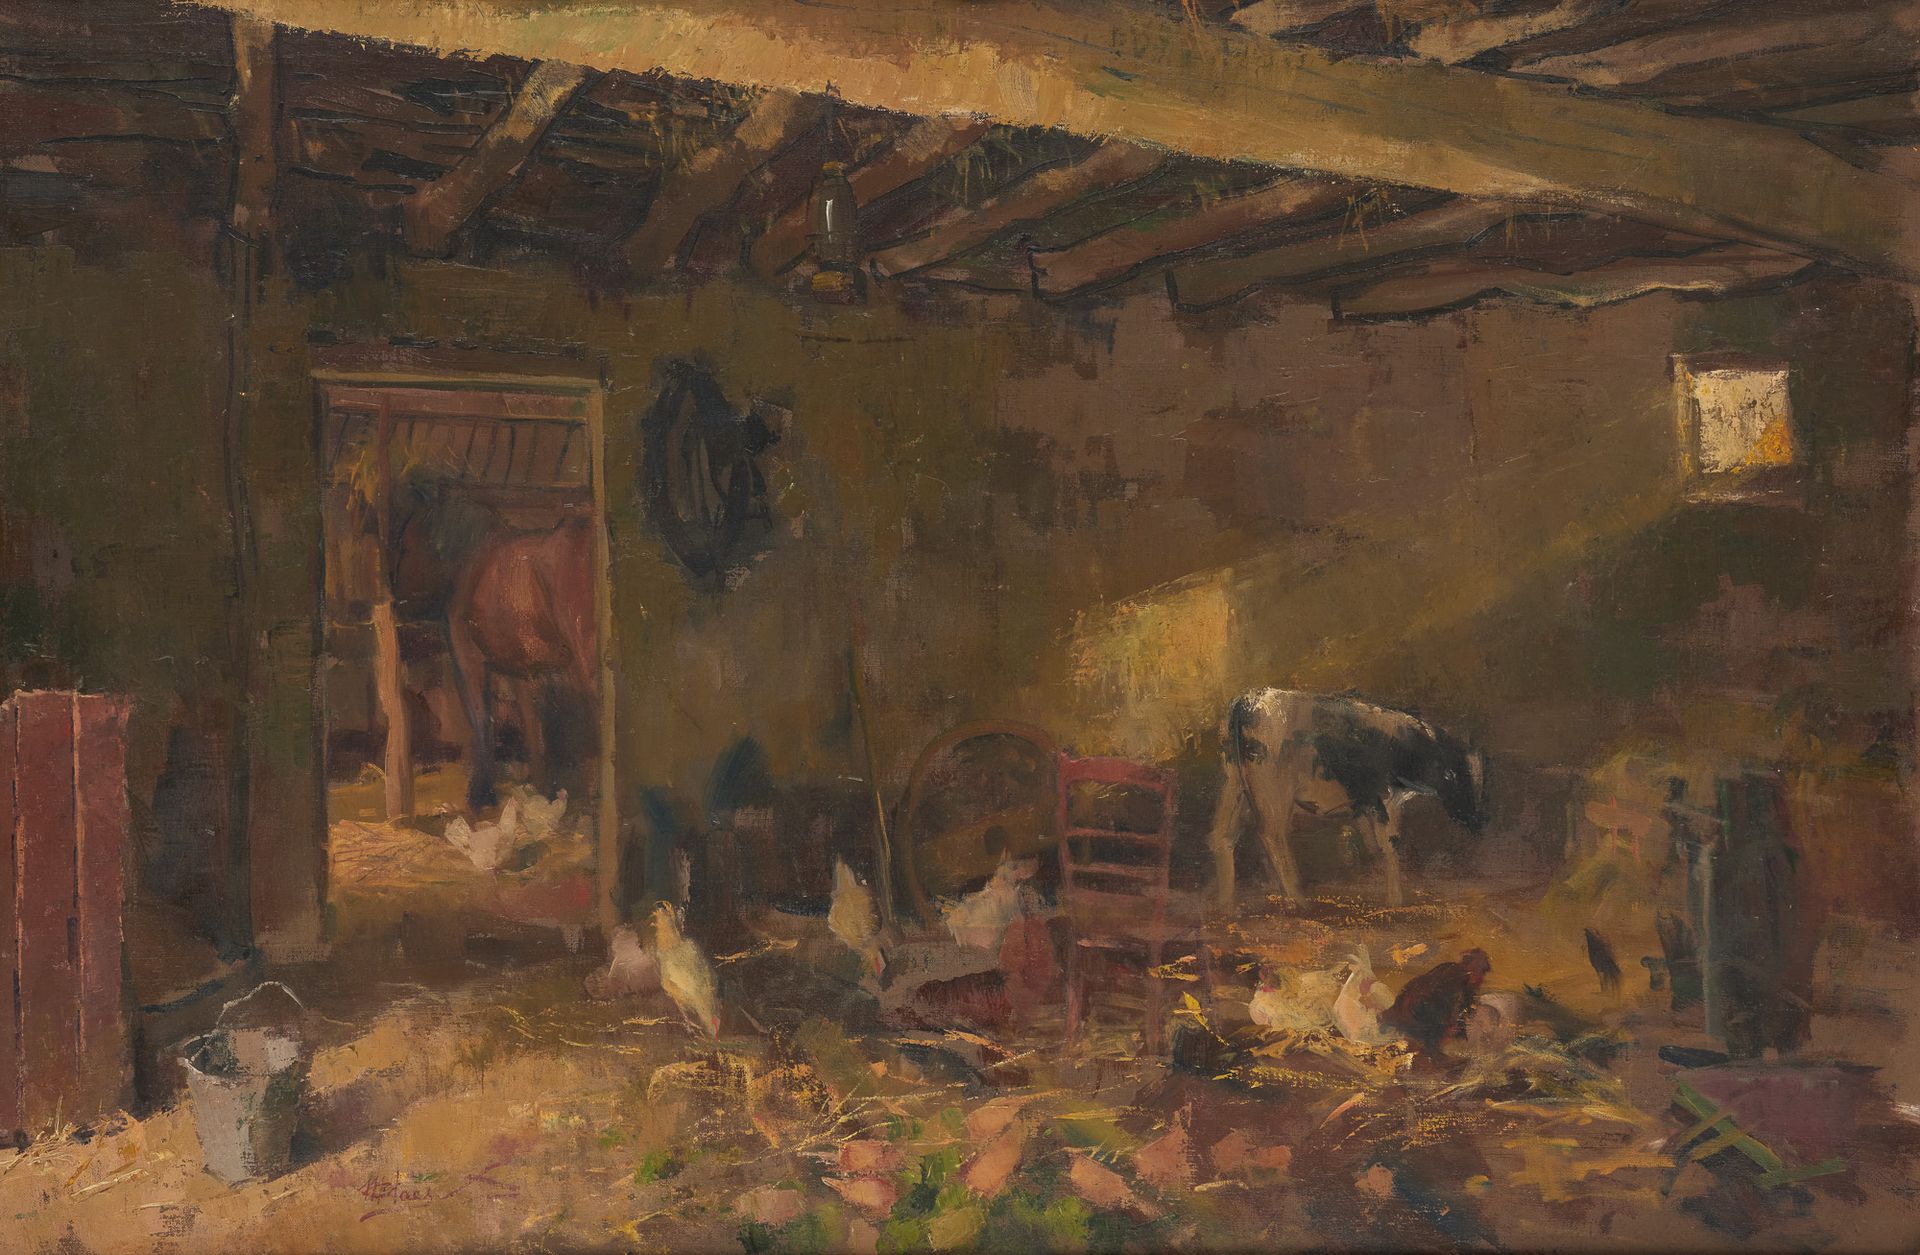 Henry SCHOUTEN École belge (1857/64-1927) Oil on canvas: Interior of a stable.

&hellip;